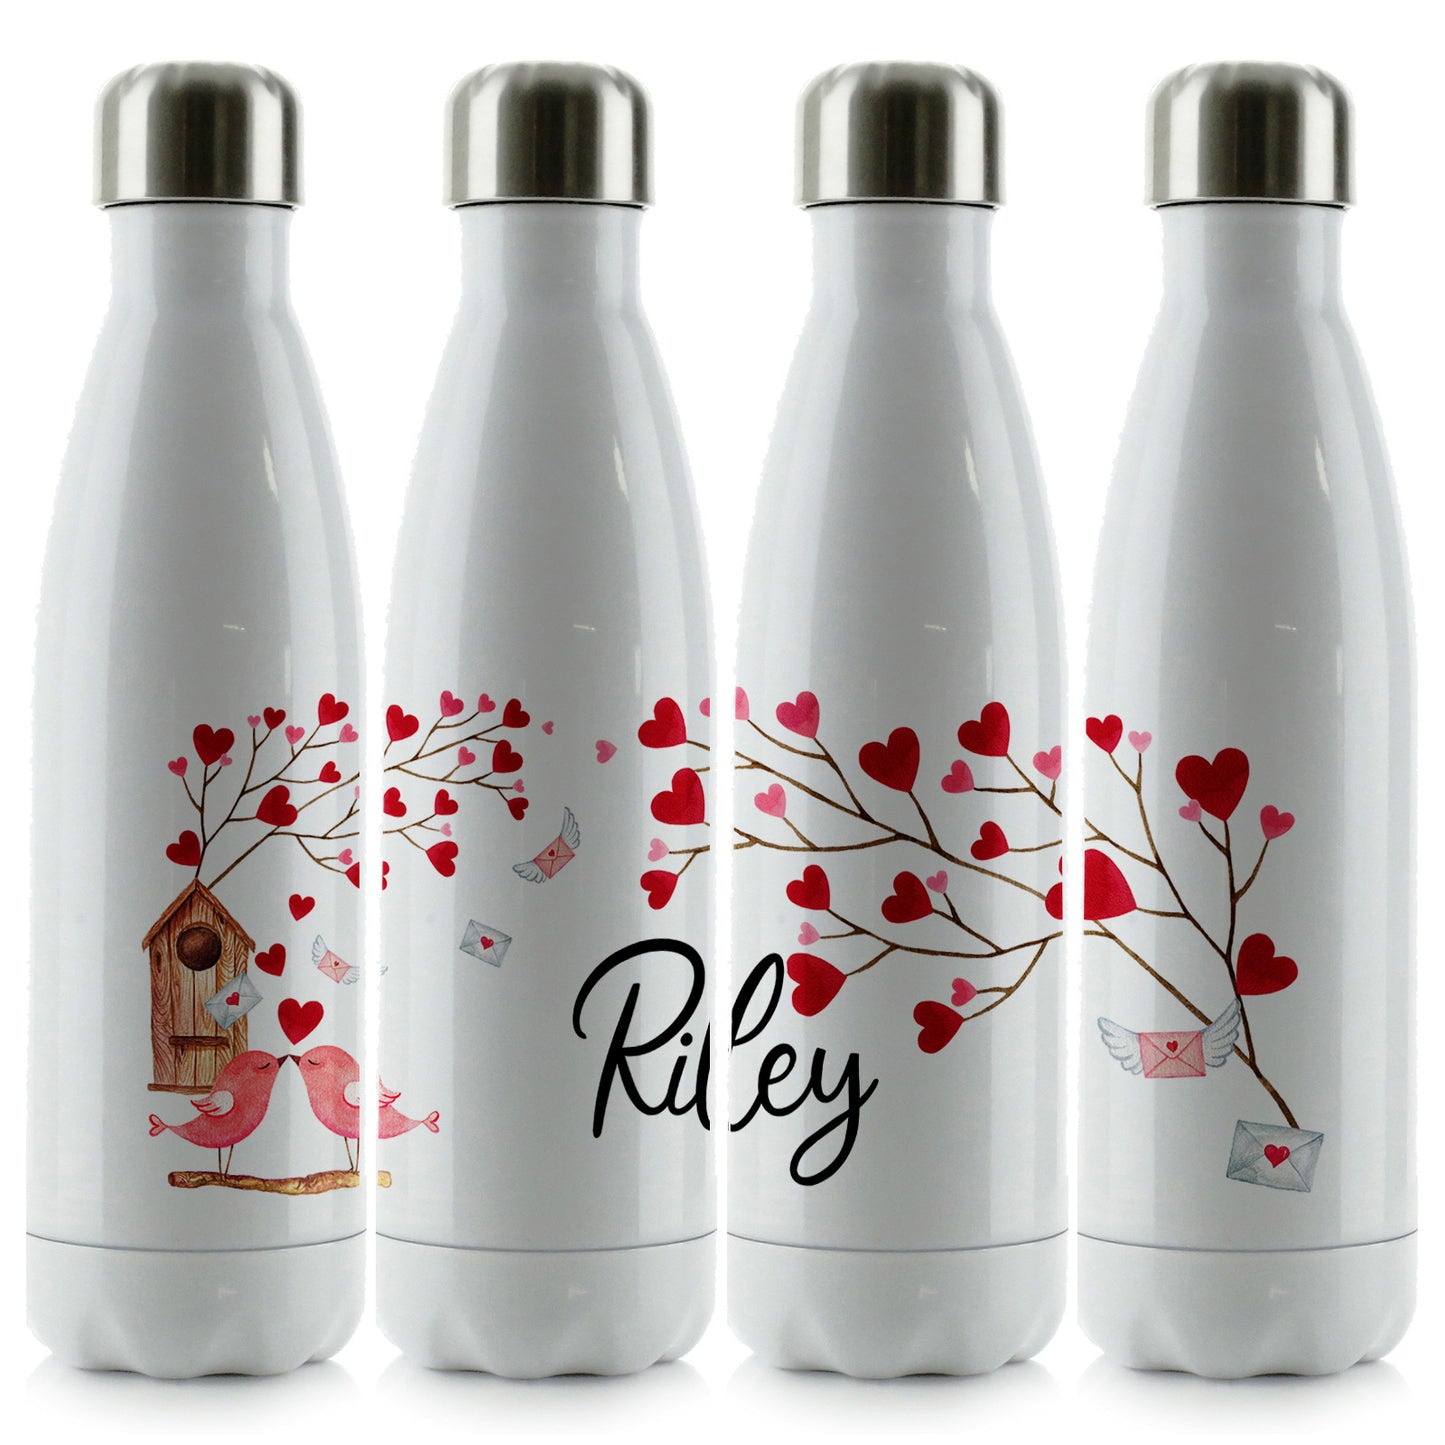 Personalised Cola Bottle with Stylish Text and Love Bird Letters Print